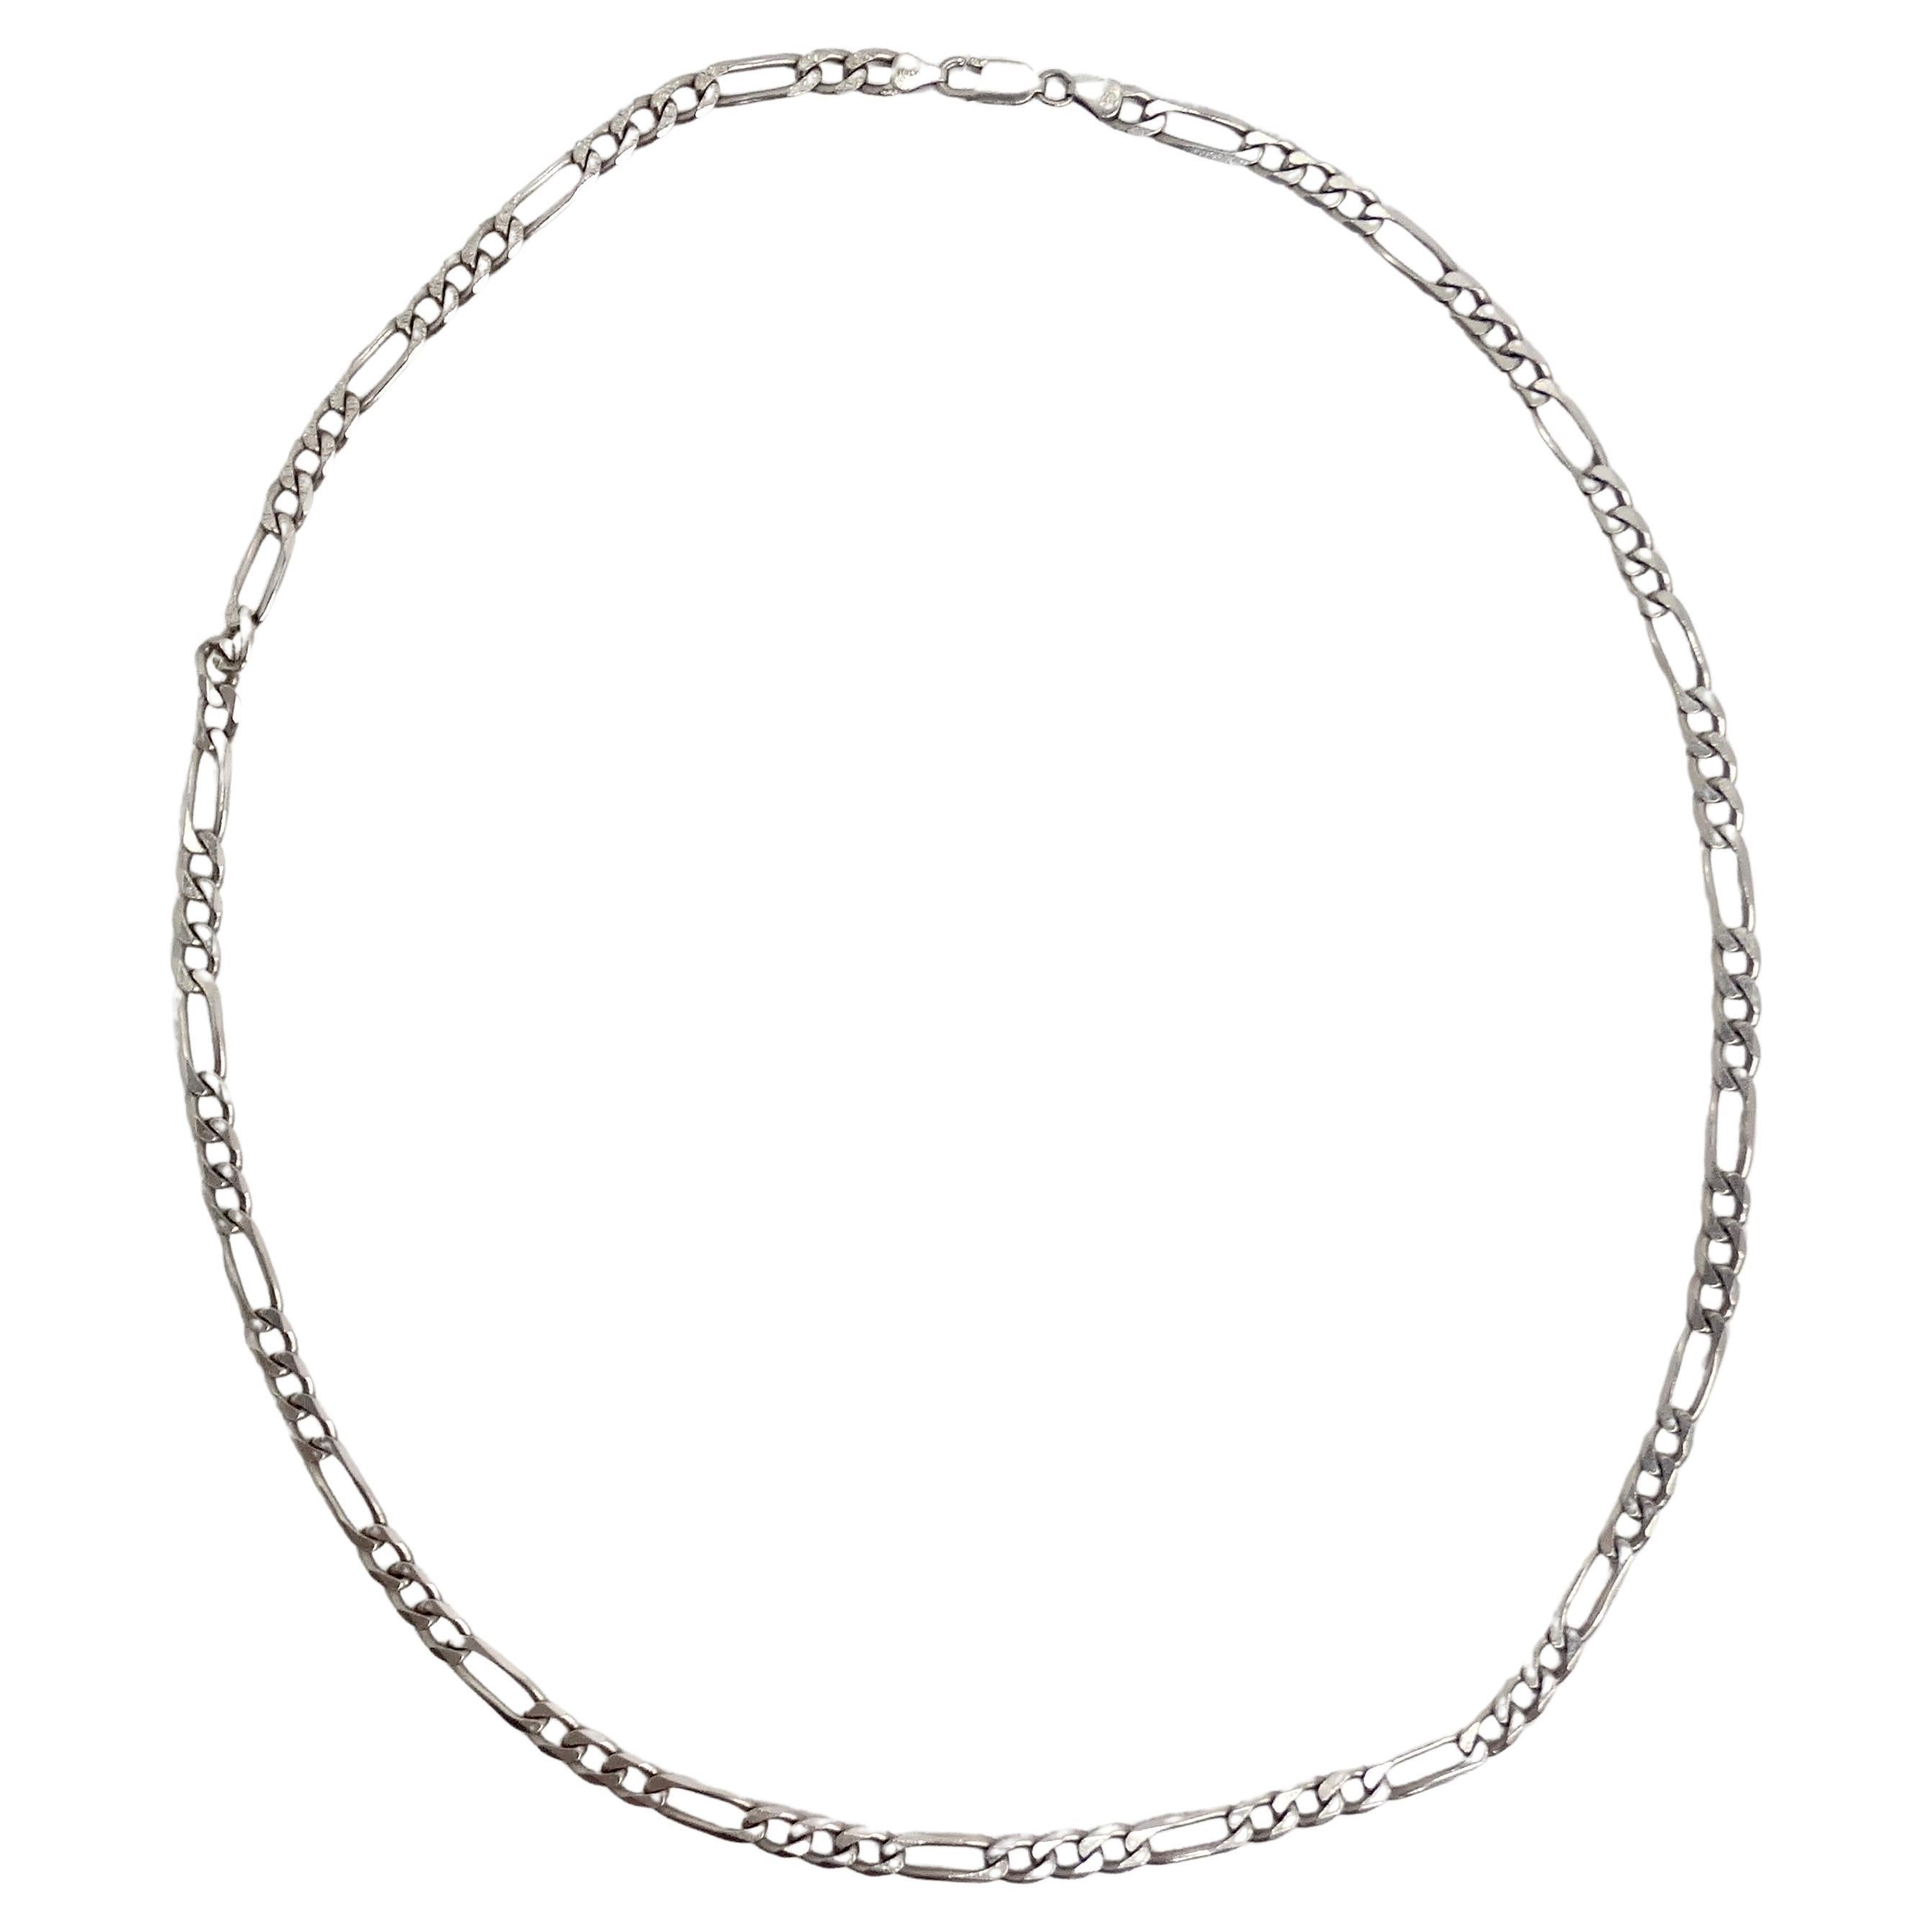 1980s Solid Silver Miami Link Chain Necklace For Sale